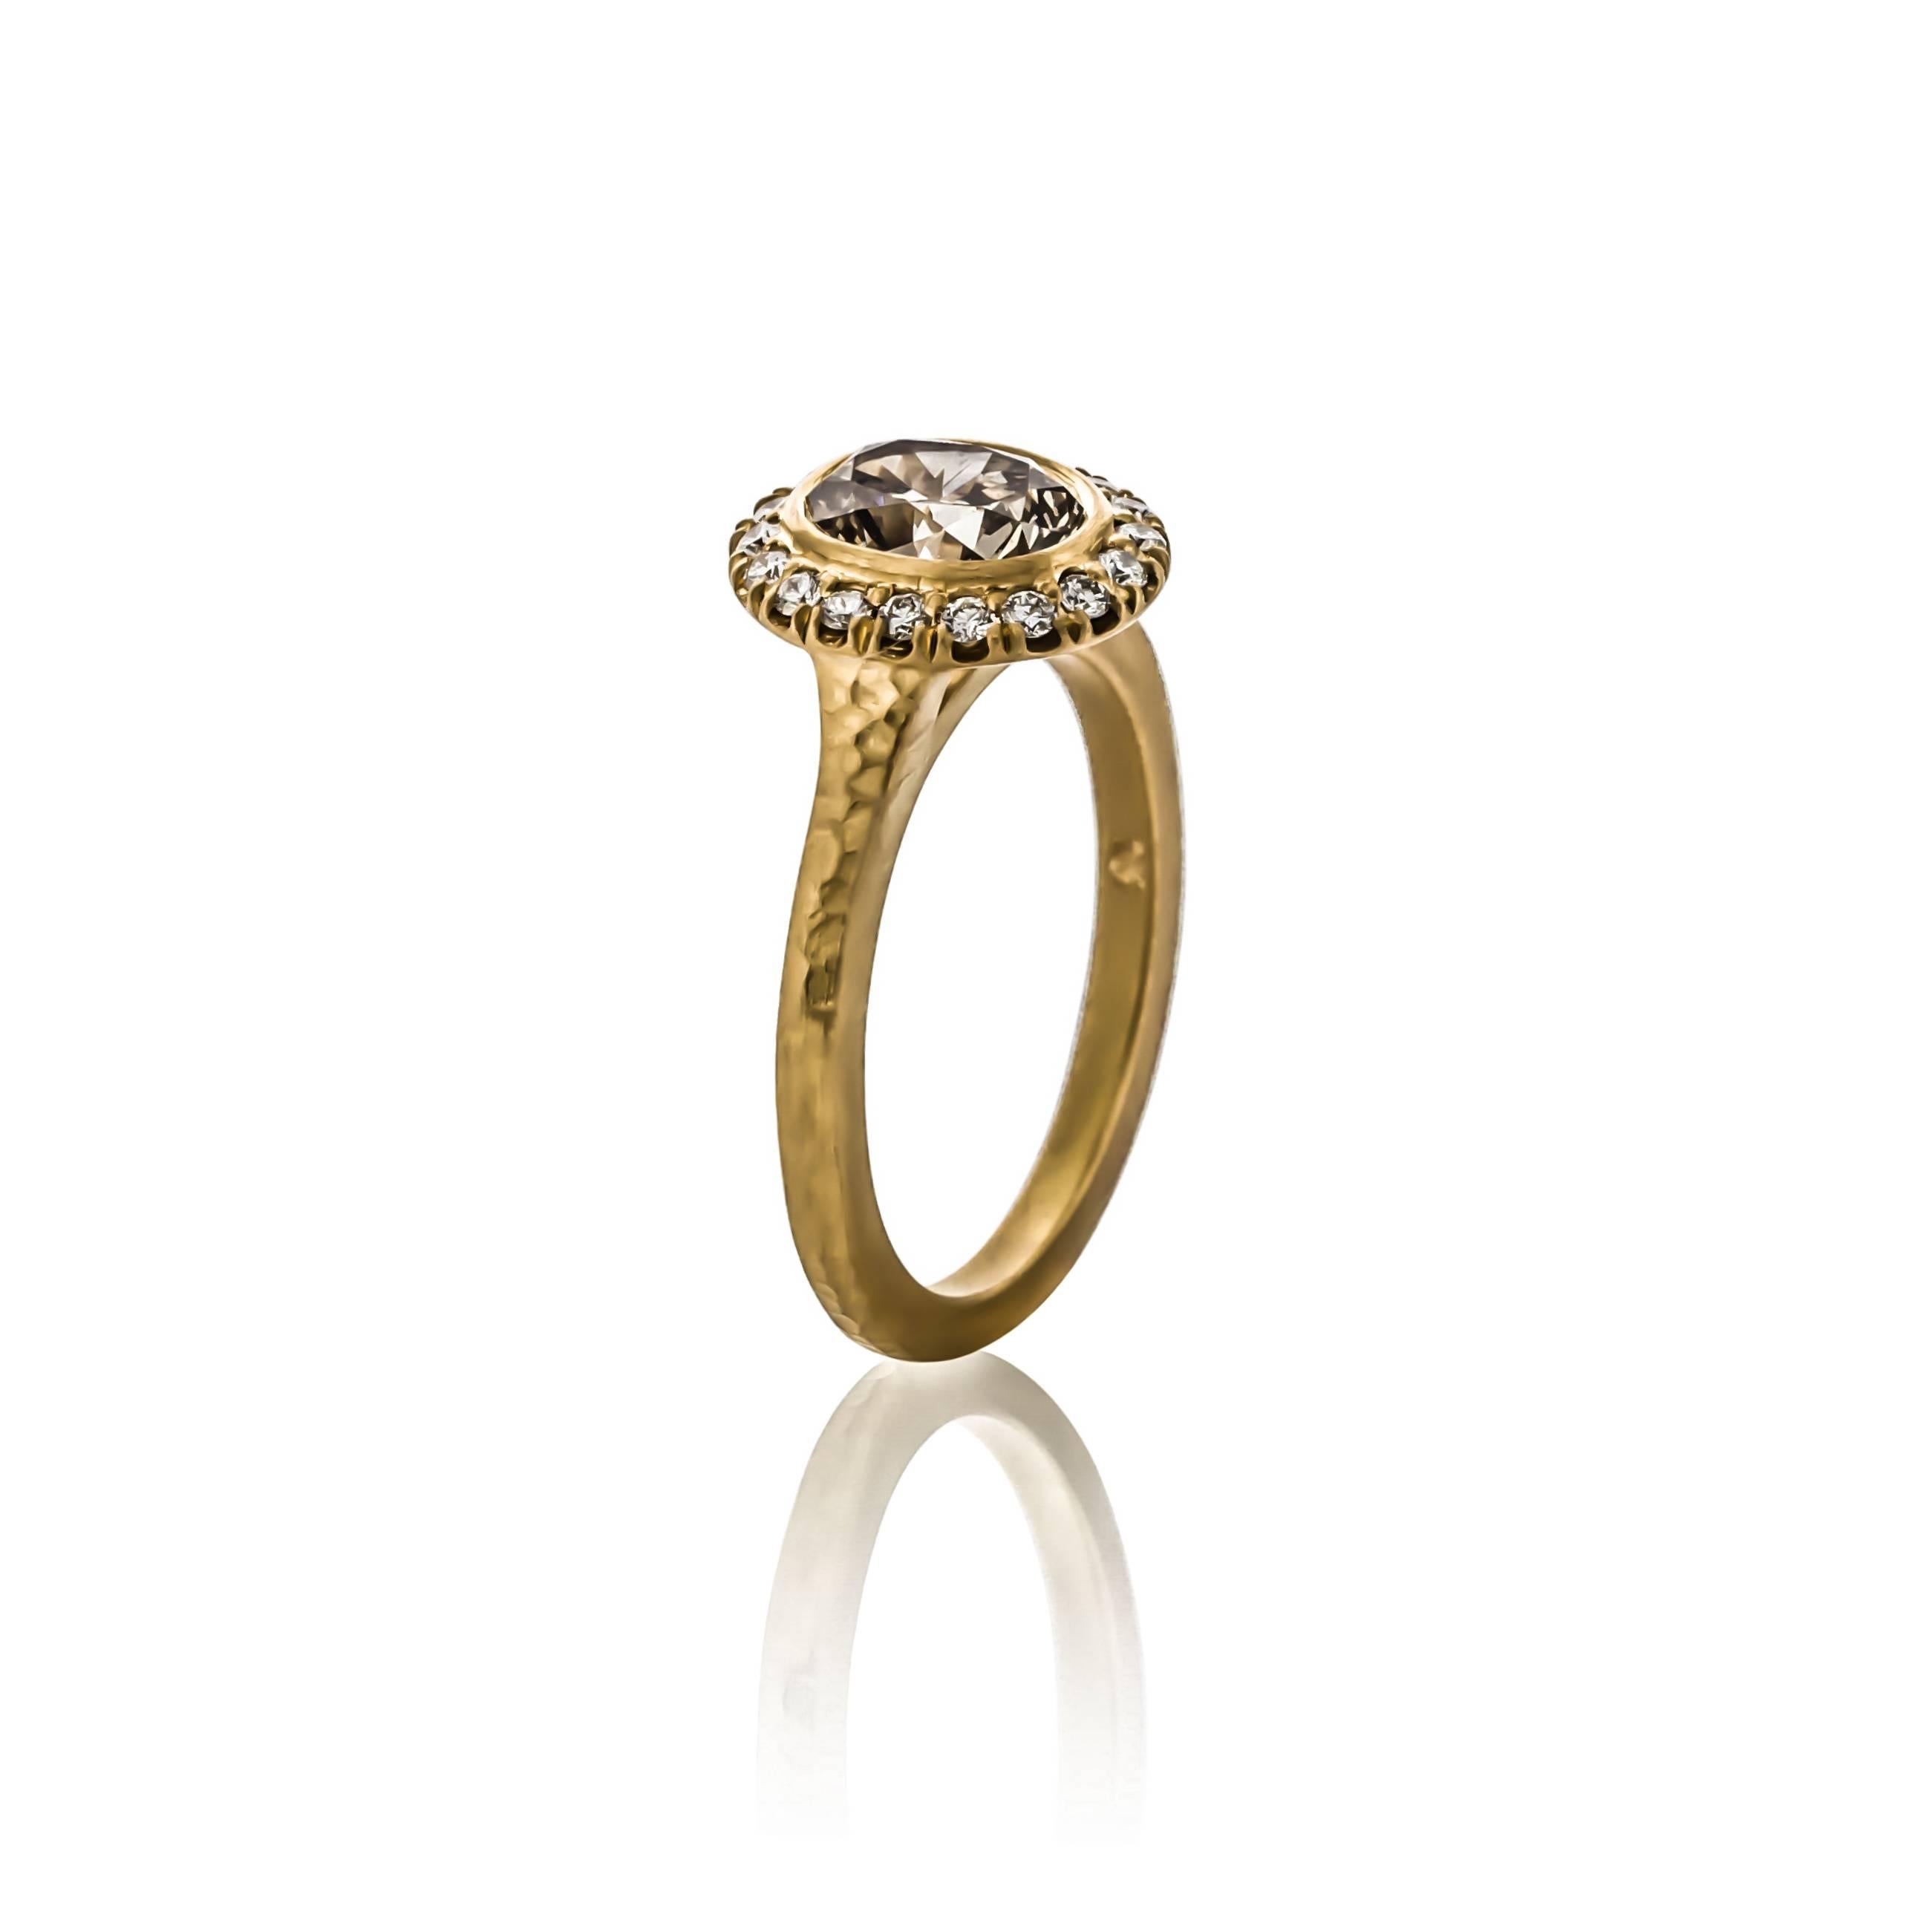 One of a Kind 22K yellow gold hammered finish halo diamond ring. Set with one oval brown diamond weighing 1.17 carats and round brilliant cut diamonds weighing .21 carats total weight, G color and VS clarity.  Hand-crafted in Richardson, Texas.     